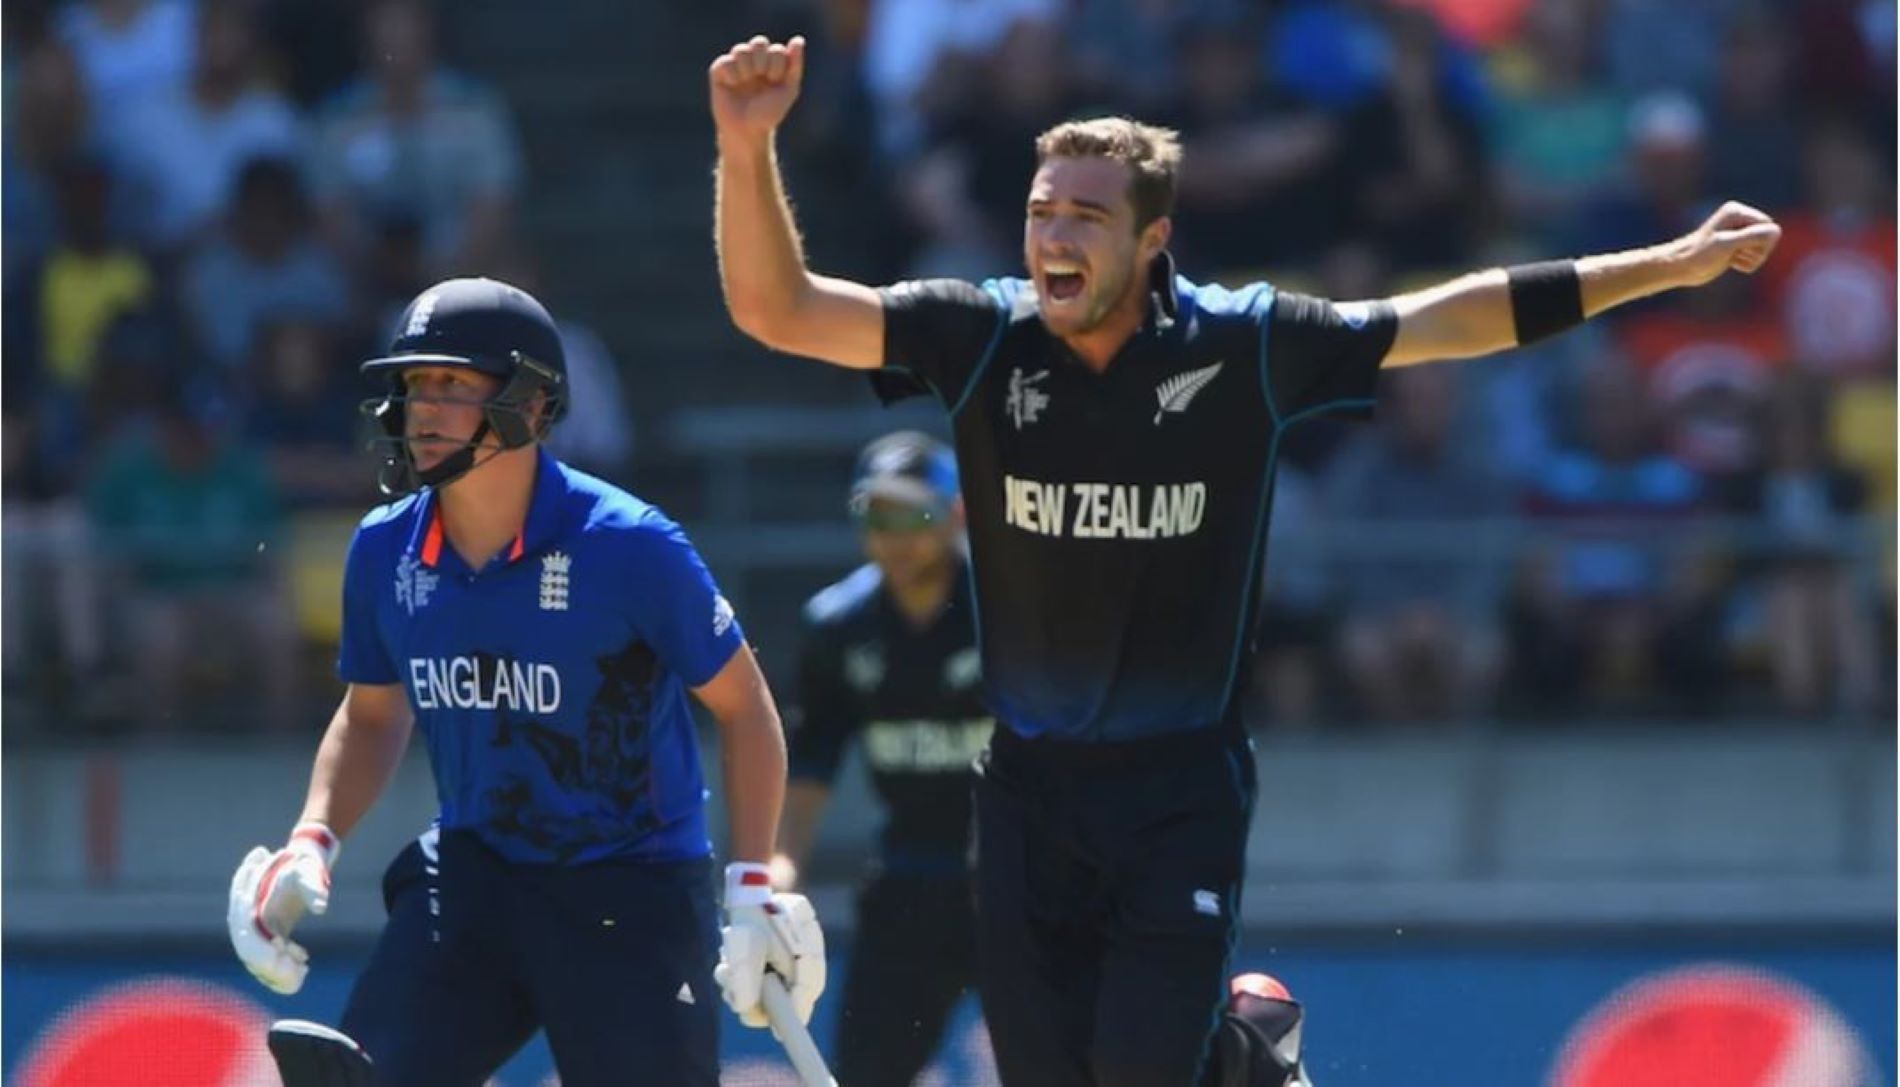 Tim Southee had the ball talking against the clueless English batters.